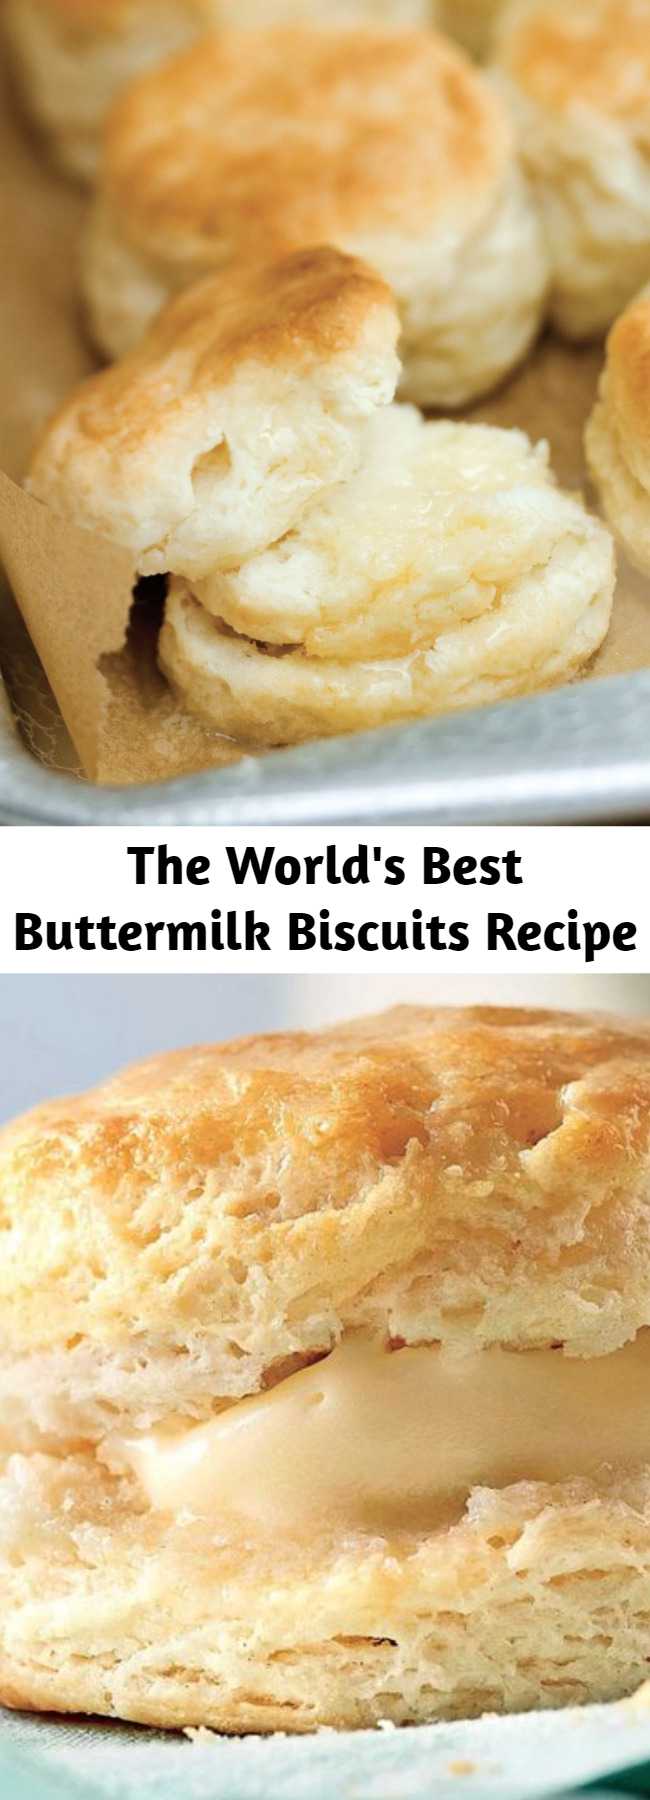 The World's Best Buttermilk Biscuits Recipe - This no-fail biscuit recipe will make you look like a pro, even if this is your first attempt at biscuit-making. And if you’re looking for something a little beyond a basic biscuit, try one of our delicious variations. However you make them, you’ll be rewarded with layer upon buttery layer of biscuit perfection. #buttermilkbiscuits